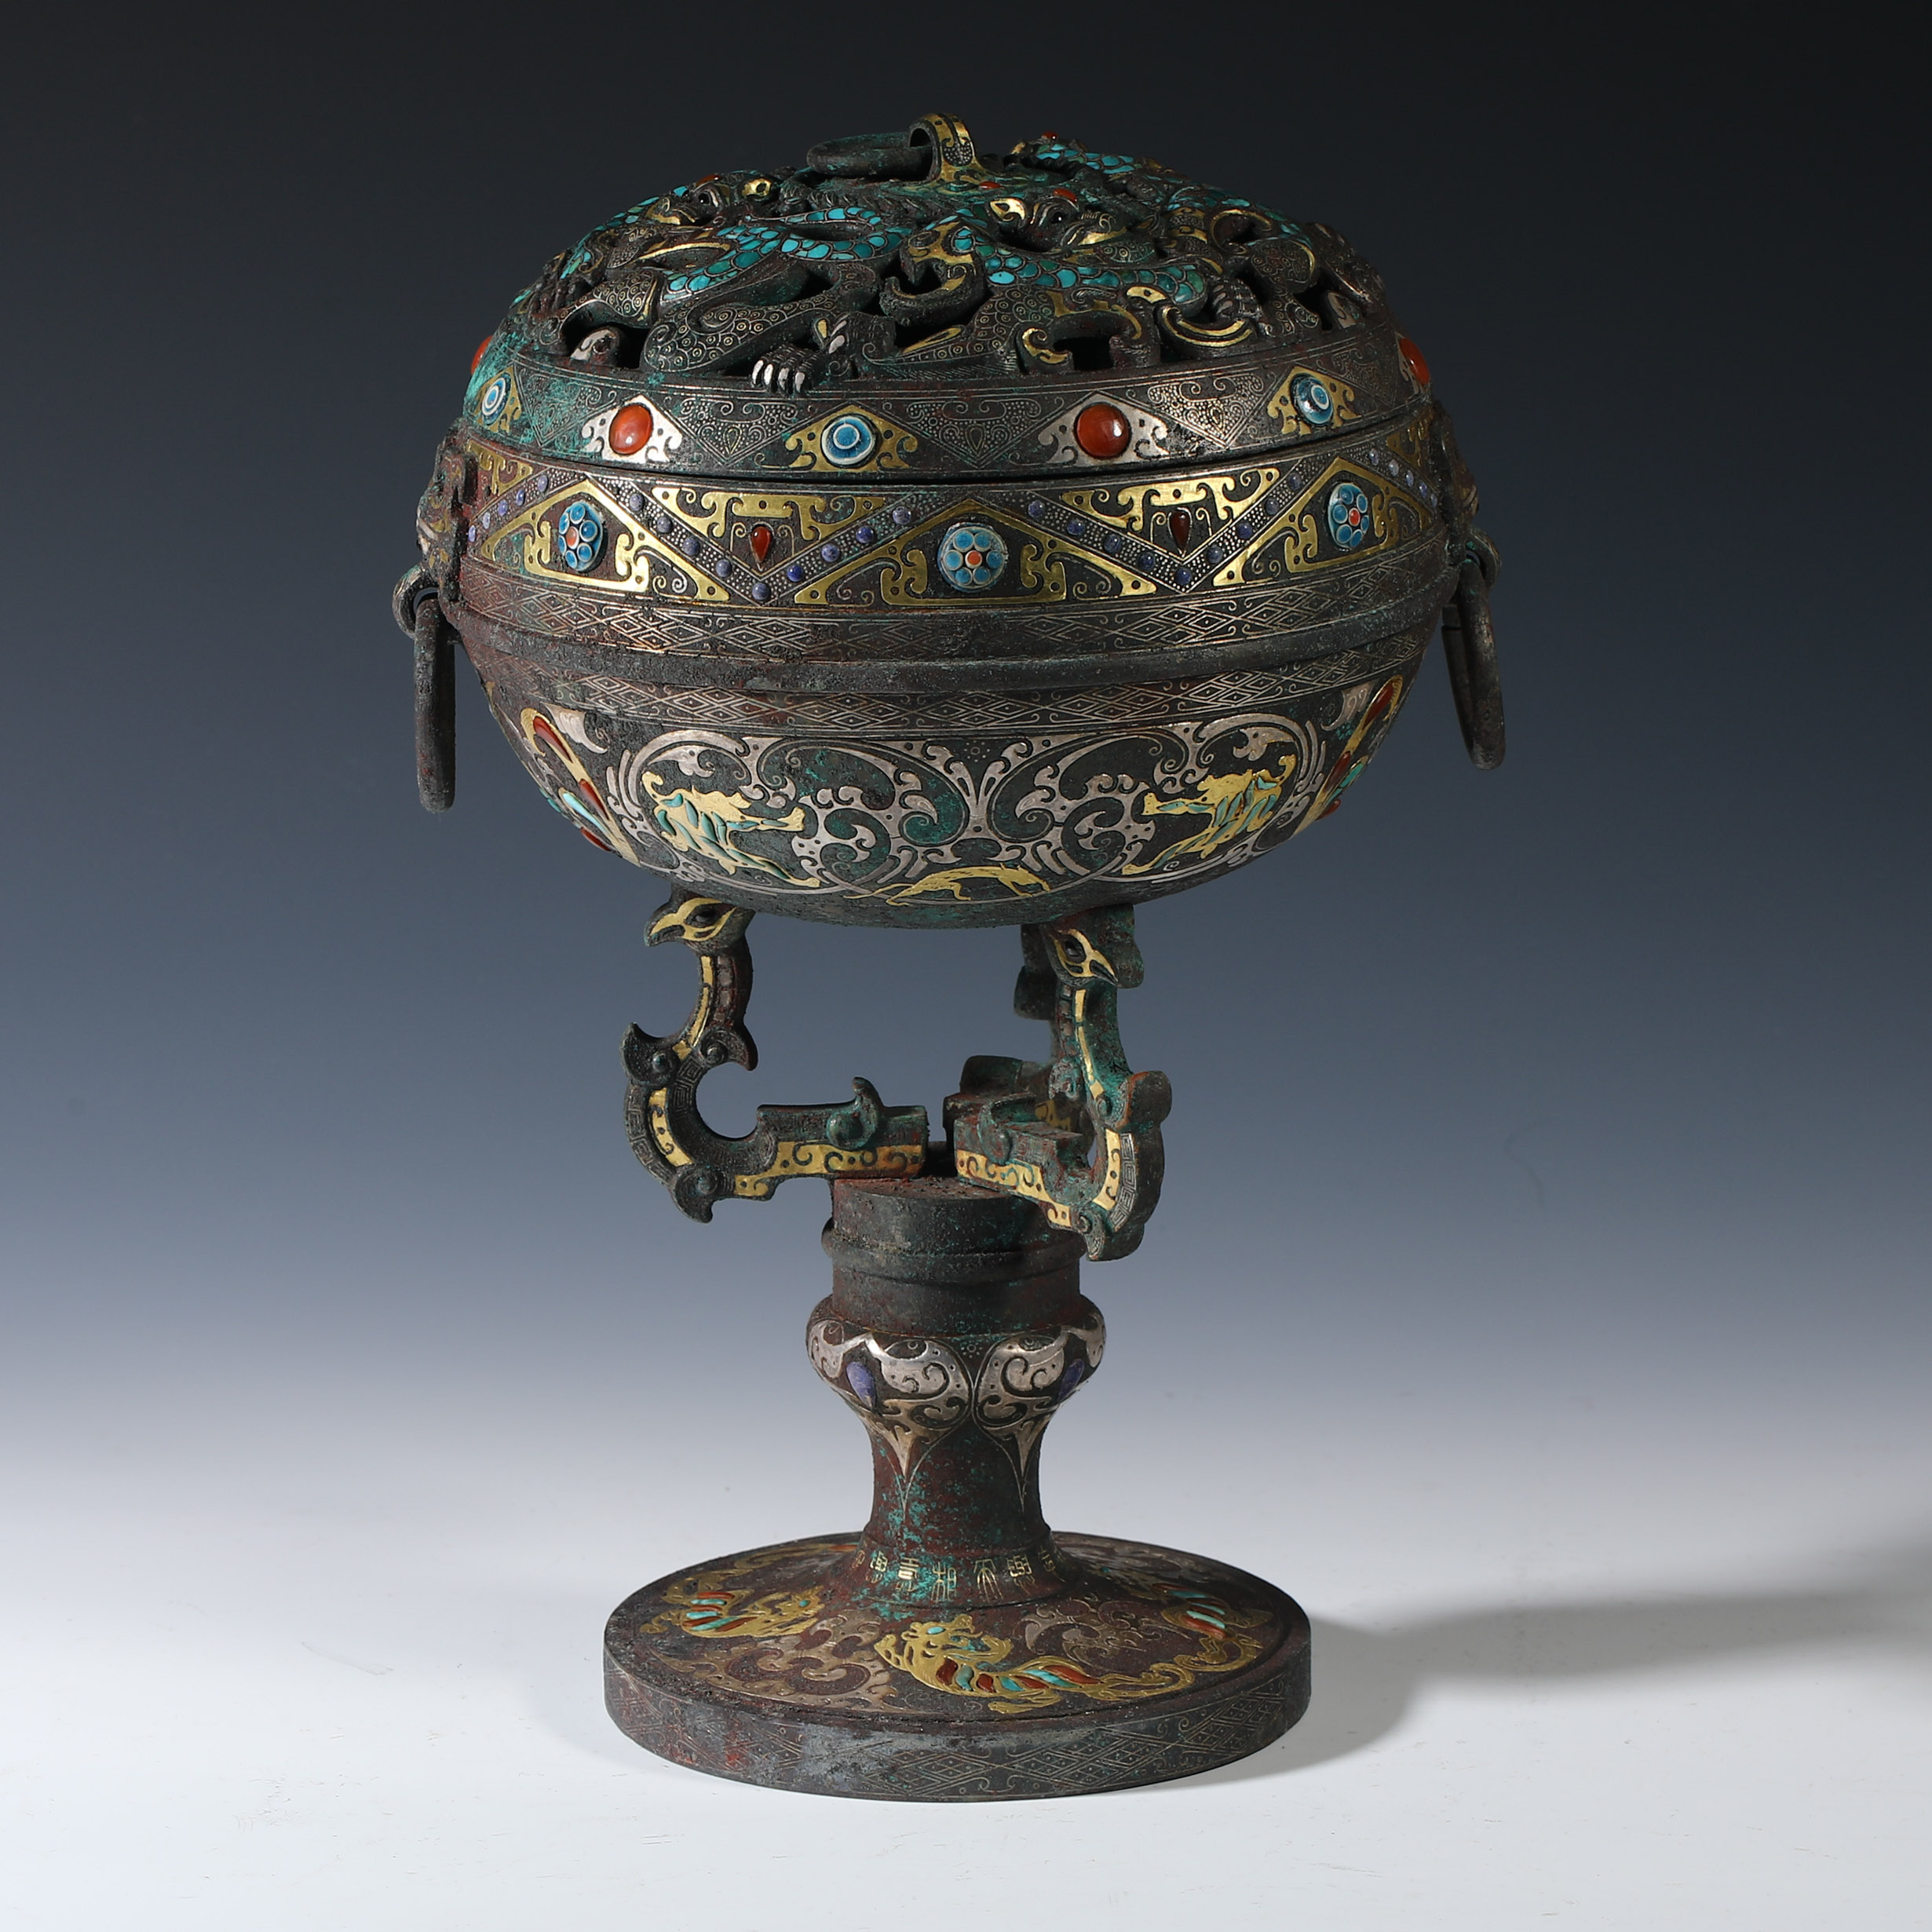 Gilded bronze and gold incense burner from the Han dynasty  